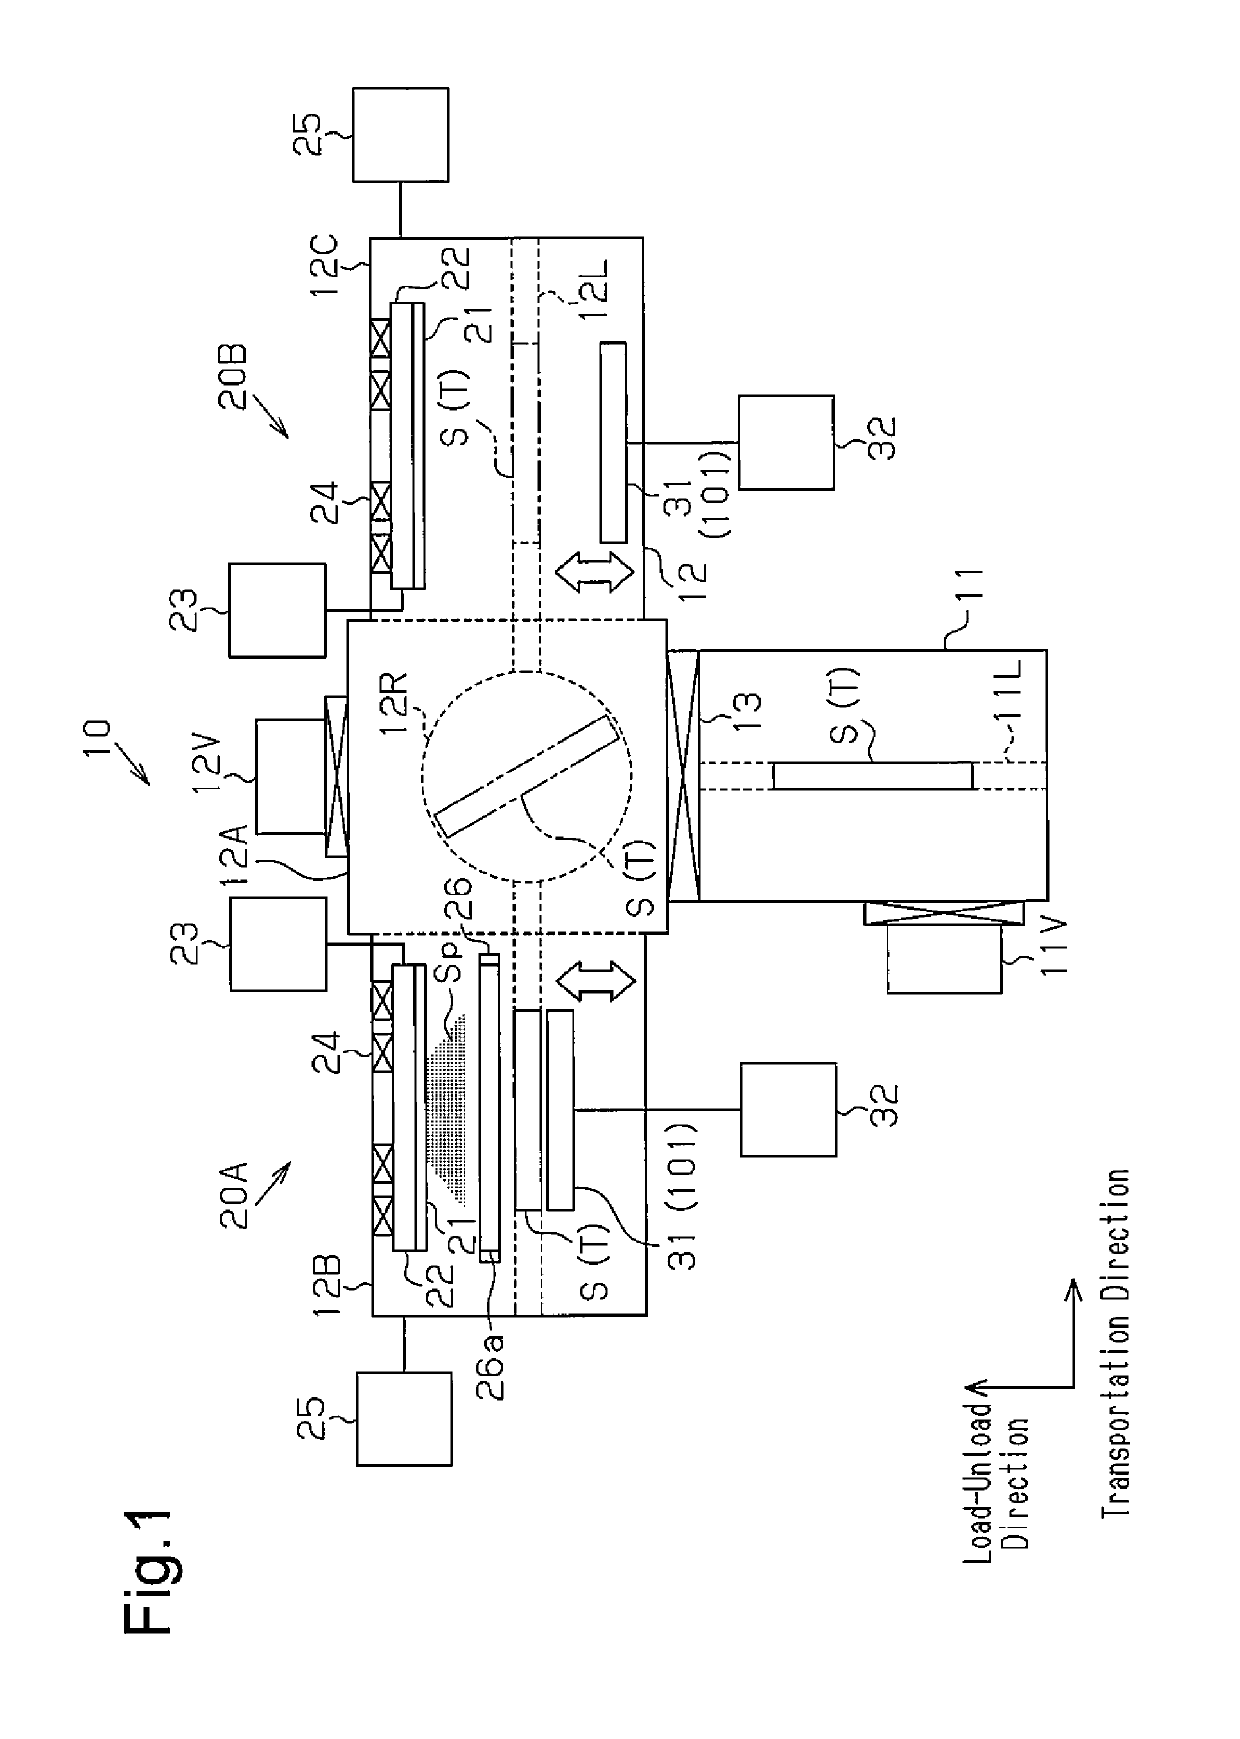 Thin substrate processing device